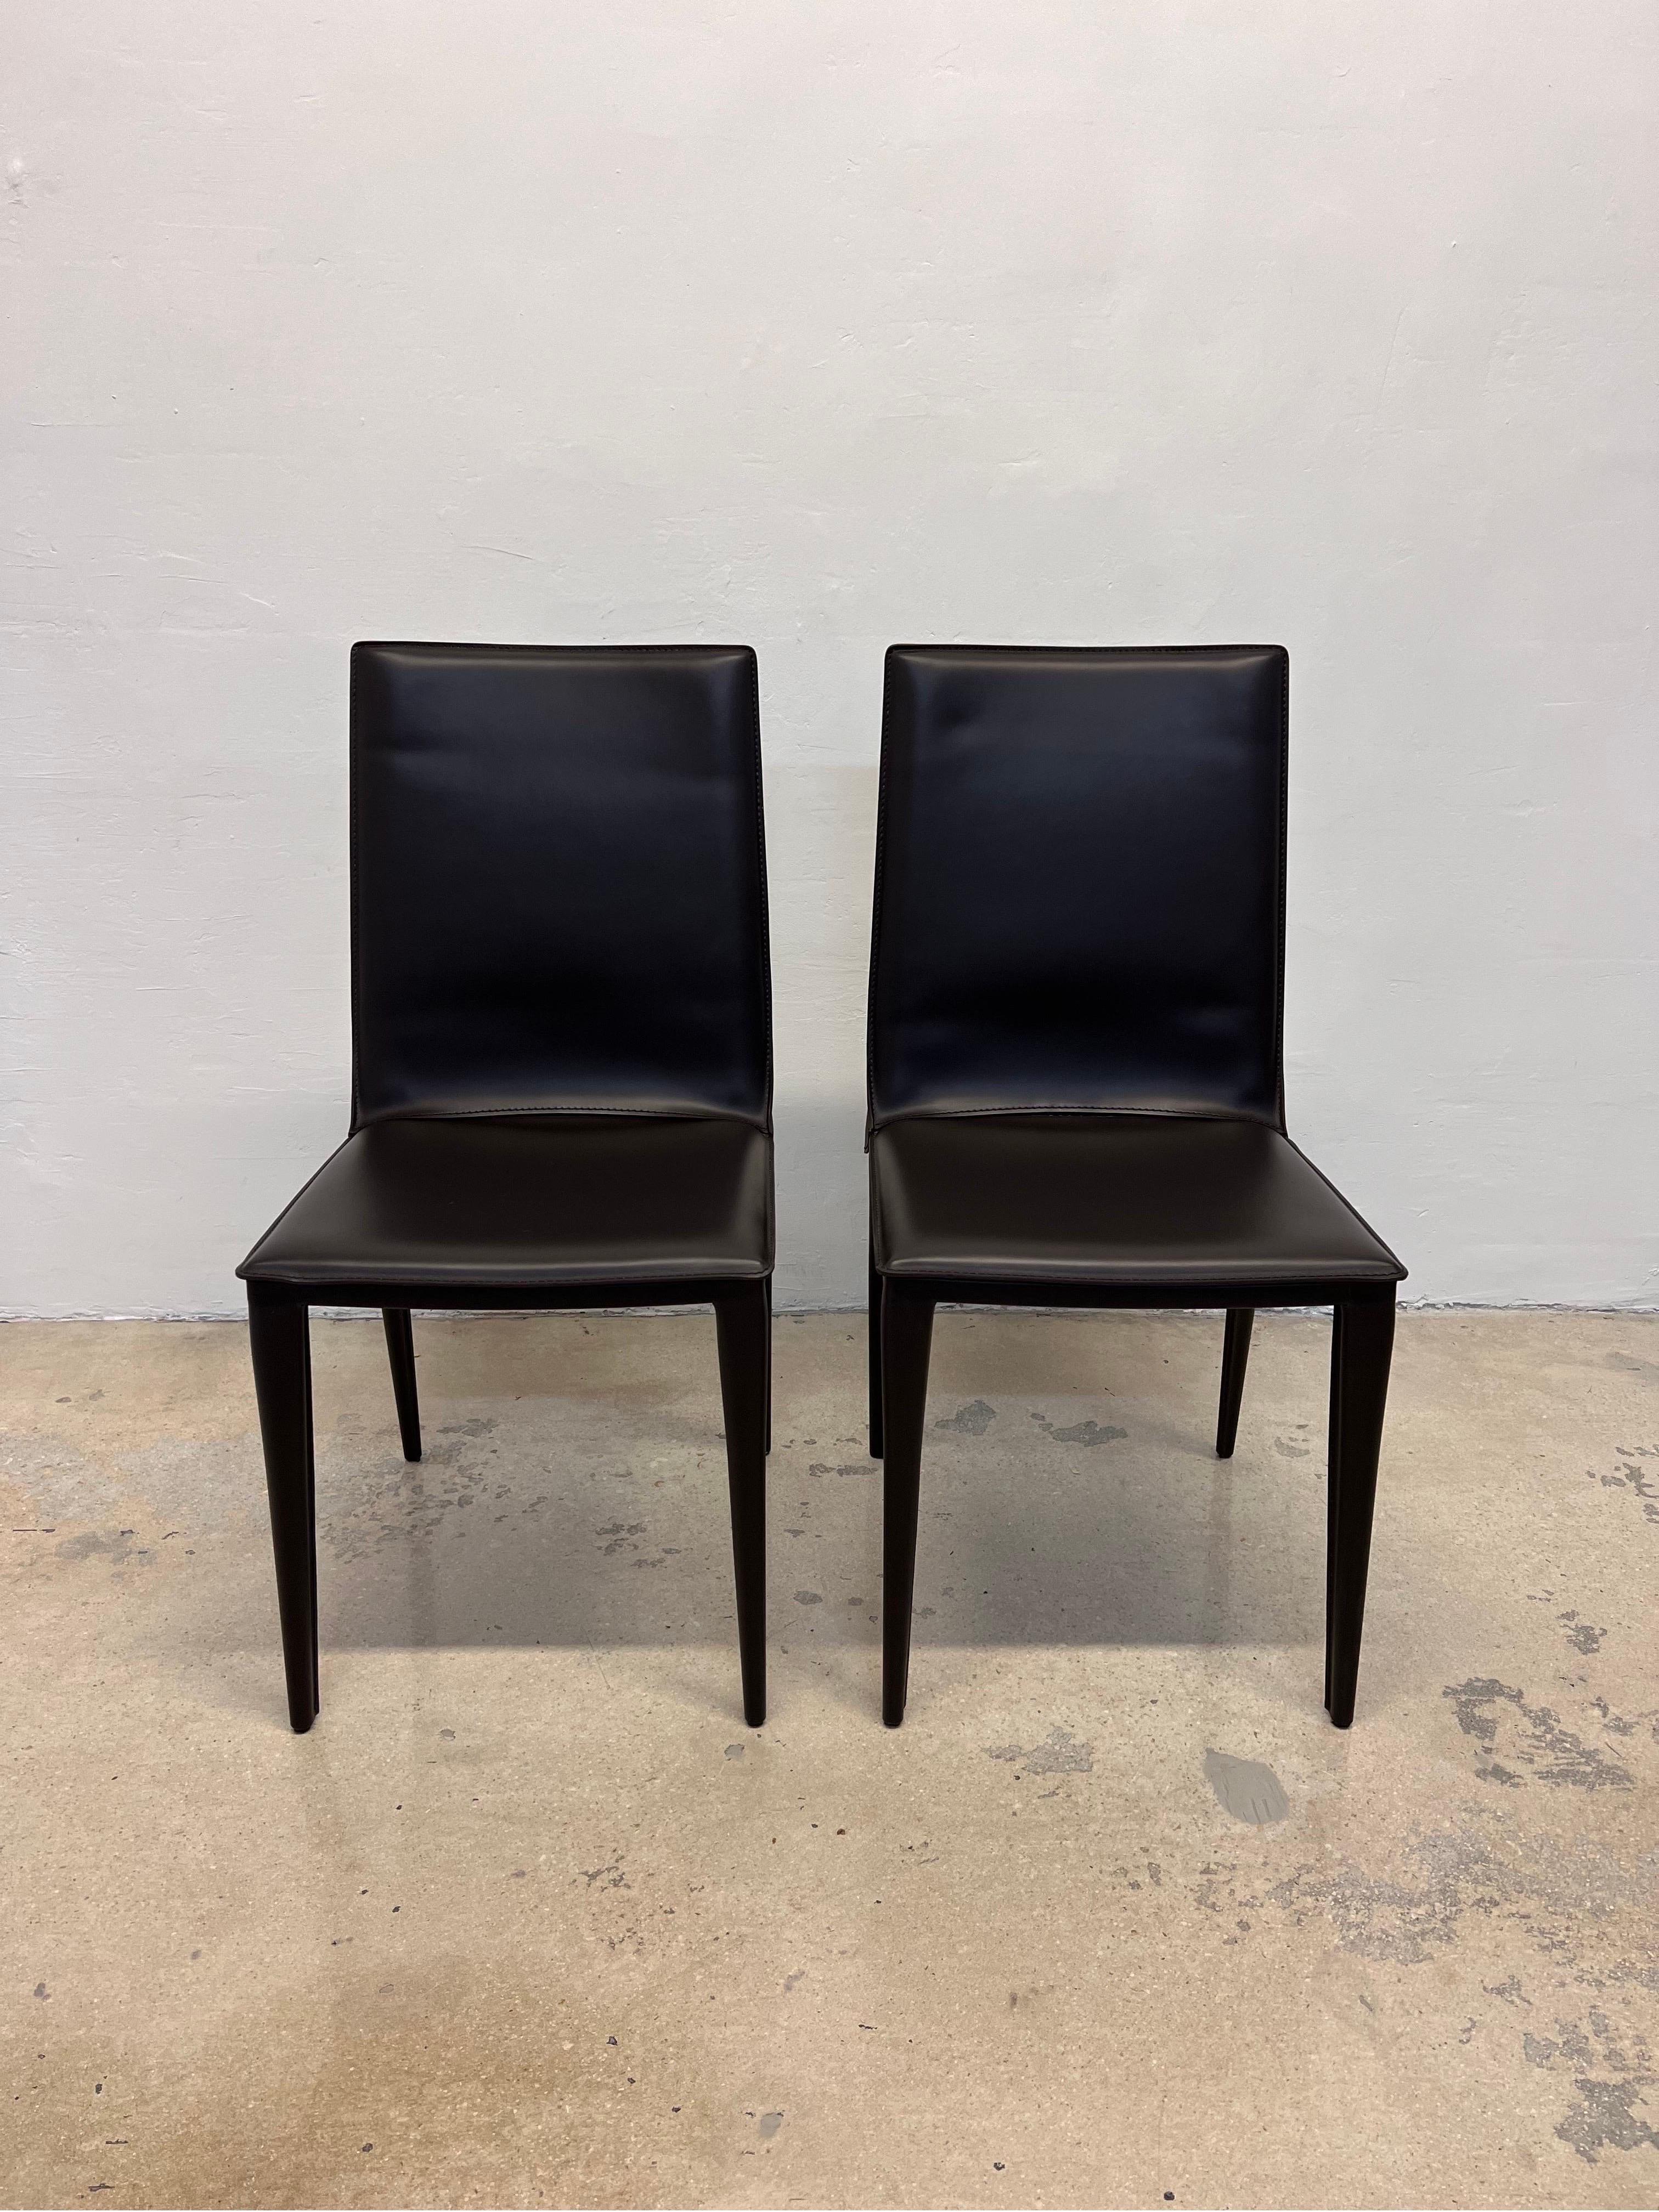 Pair of chocolate brown leather Bottega side chairs designed by Renzo Fauciglietti & Graziella Bianchi for Design Within Reach. 

Bottega Chair (2003) is constructed with a harmonic sheet steel back that flexes with you for continuous support.